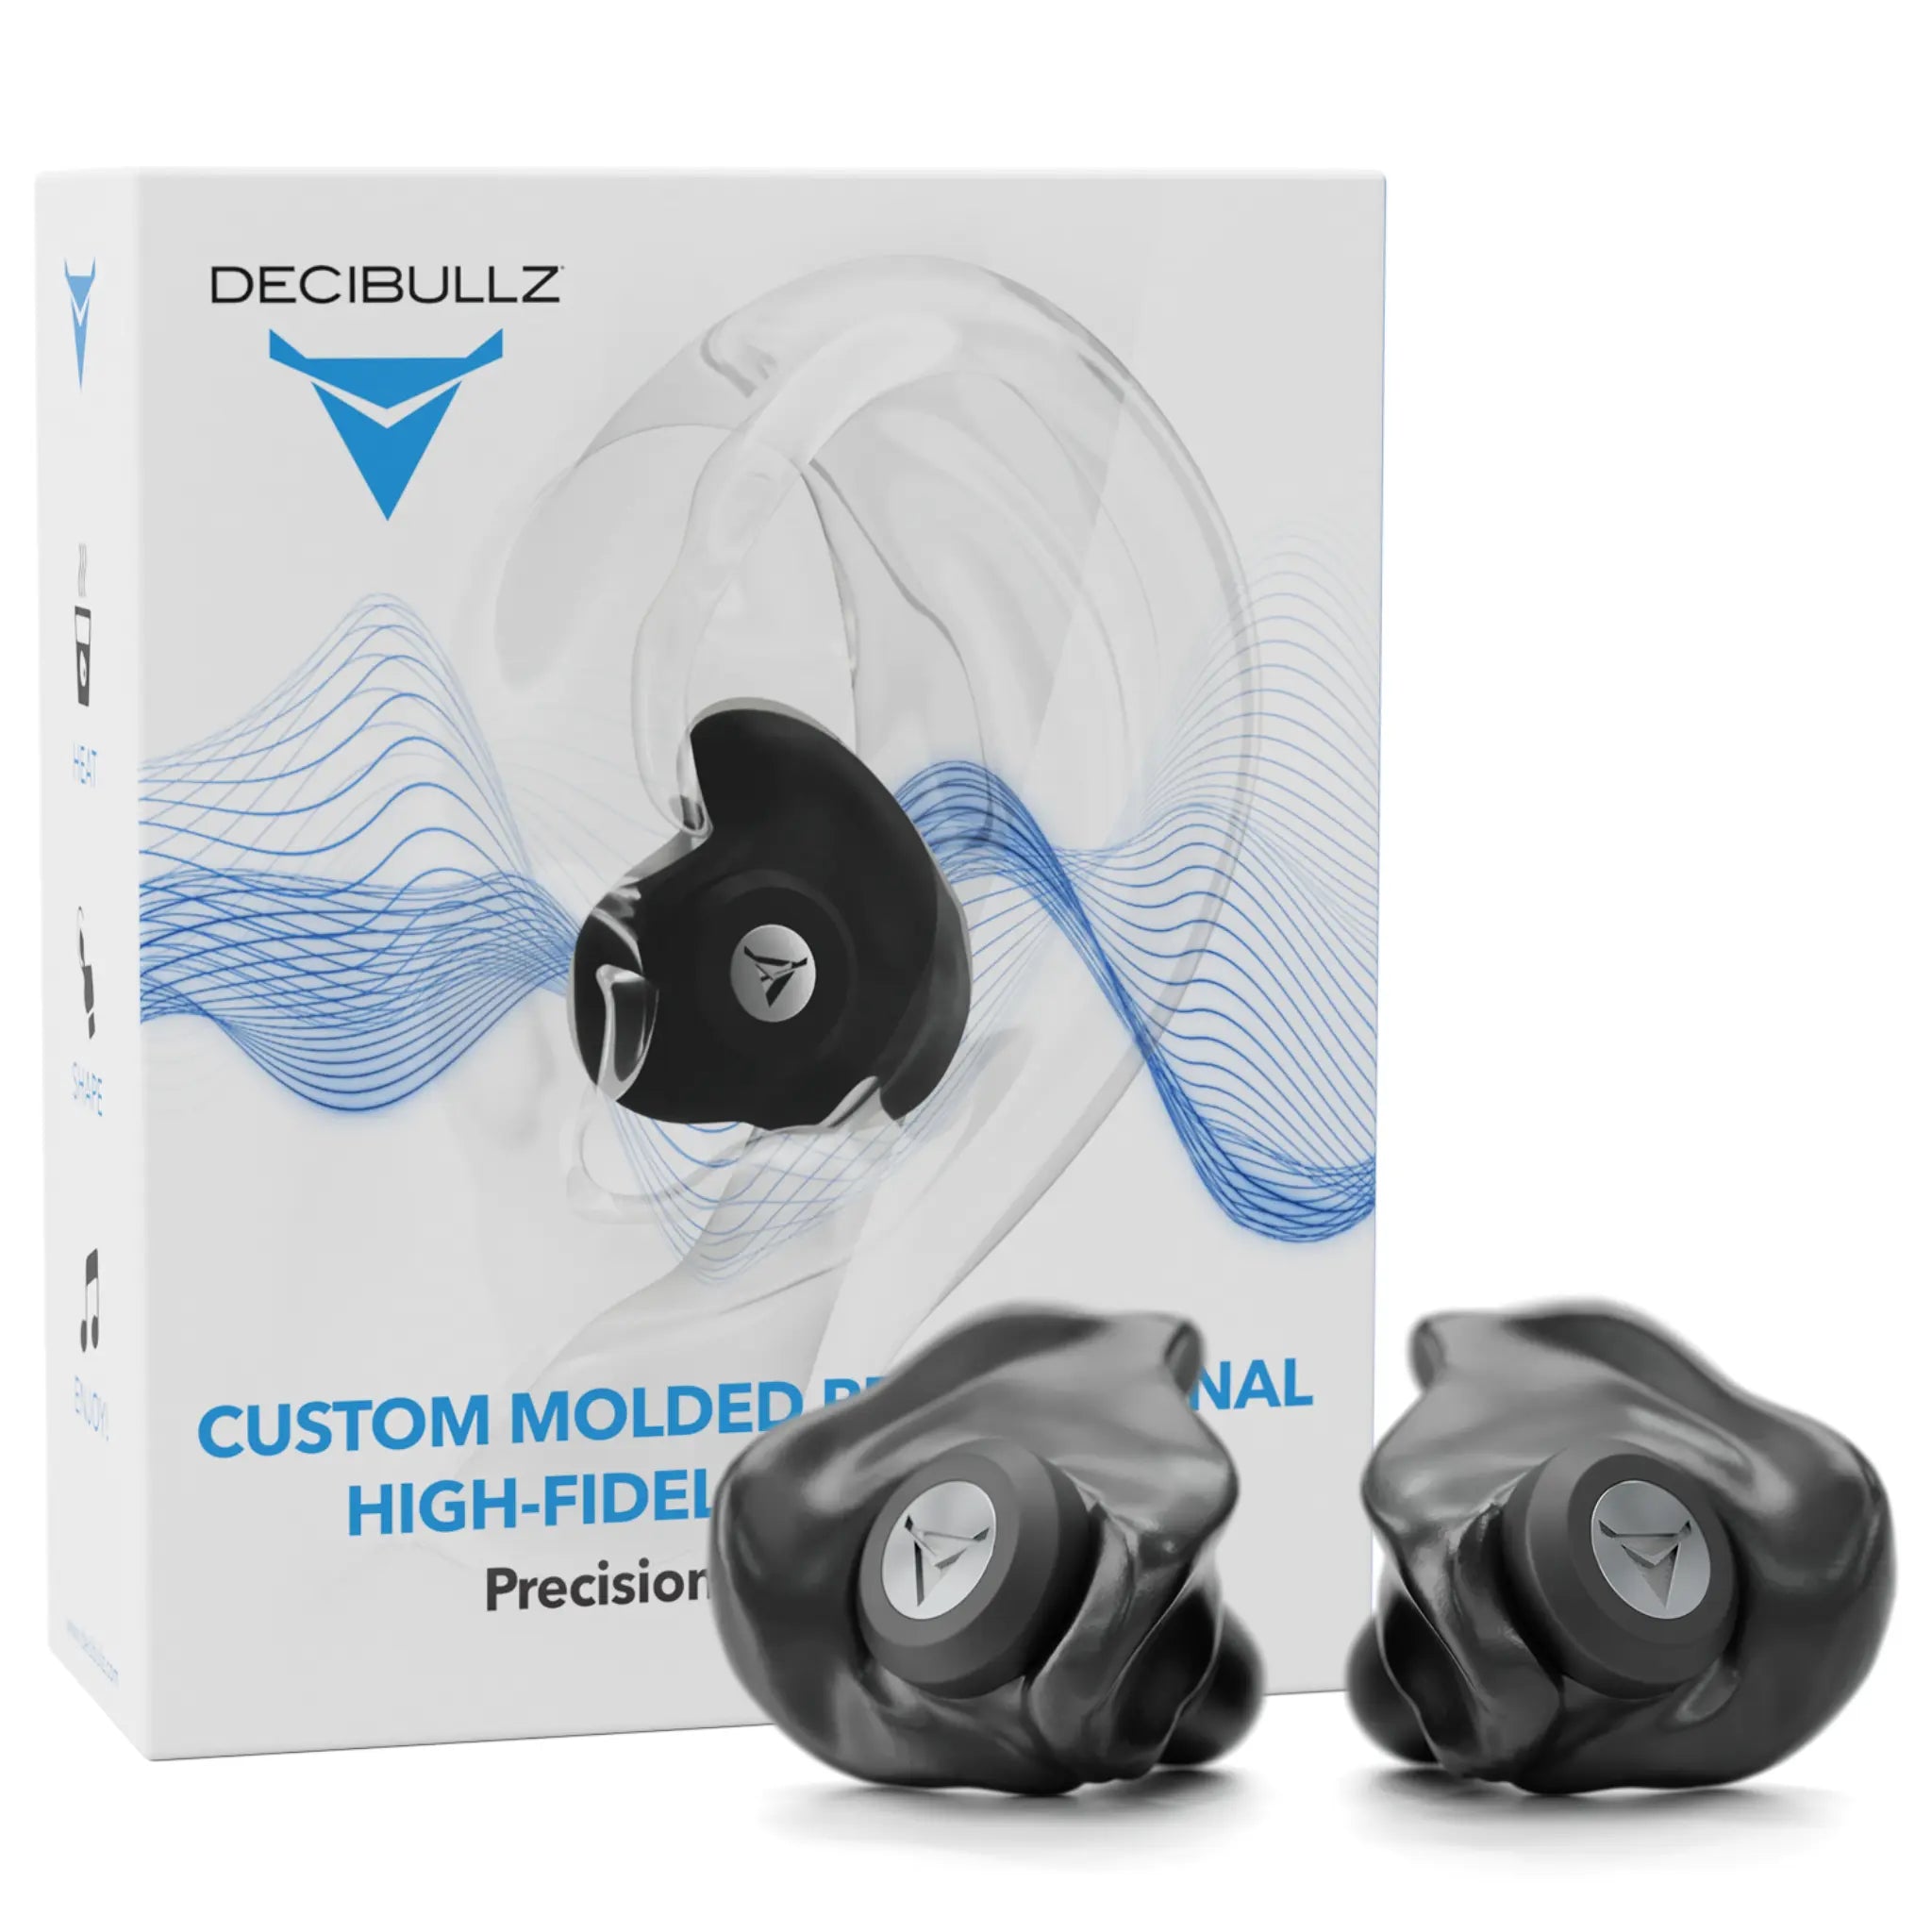 A product box for Decibullz Custom Molded Professional High-Fidelity Filter Earplugs is shown. The box features an image of the earplugs and the Decibullz logo. In front of the box, there is a pair of black earplugs with the same logo visible on each, emphasizing their top-notch hearing protection and quality.